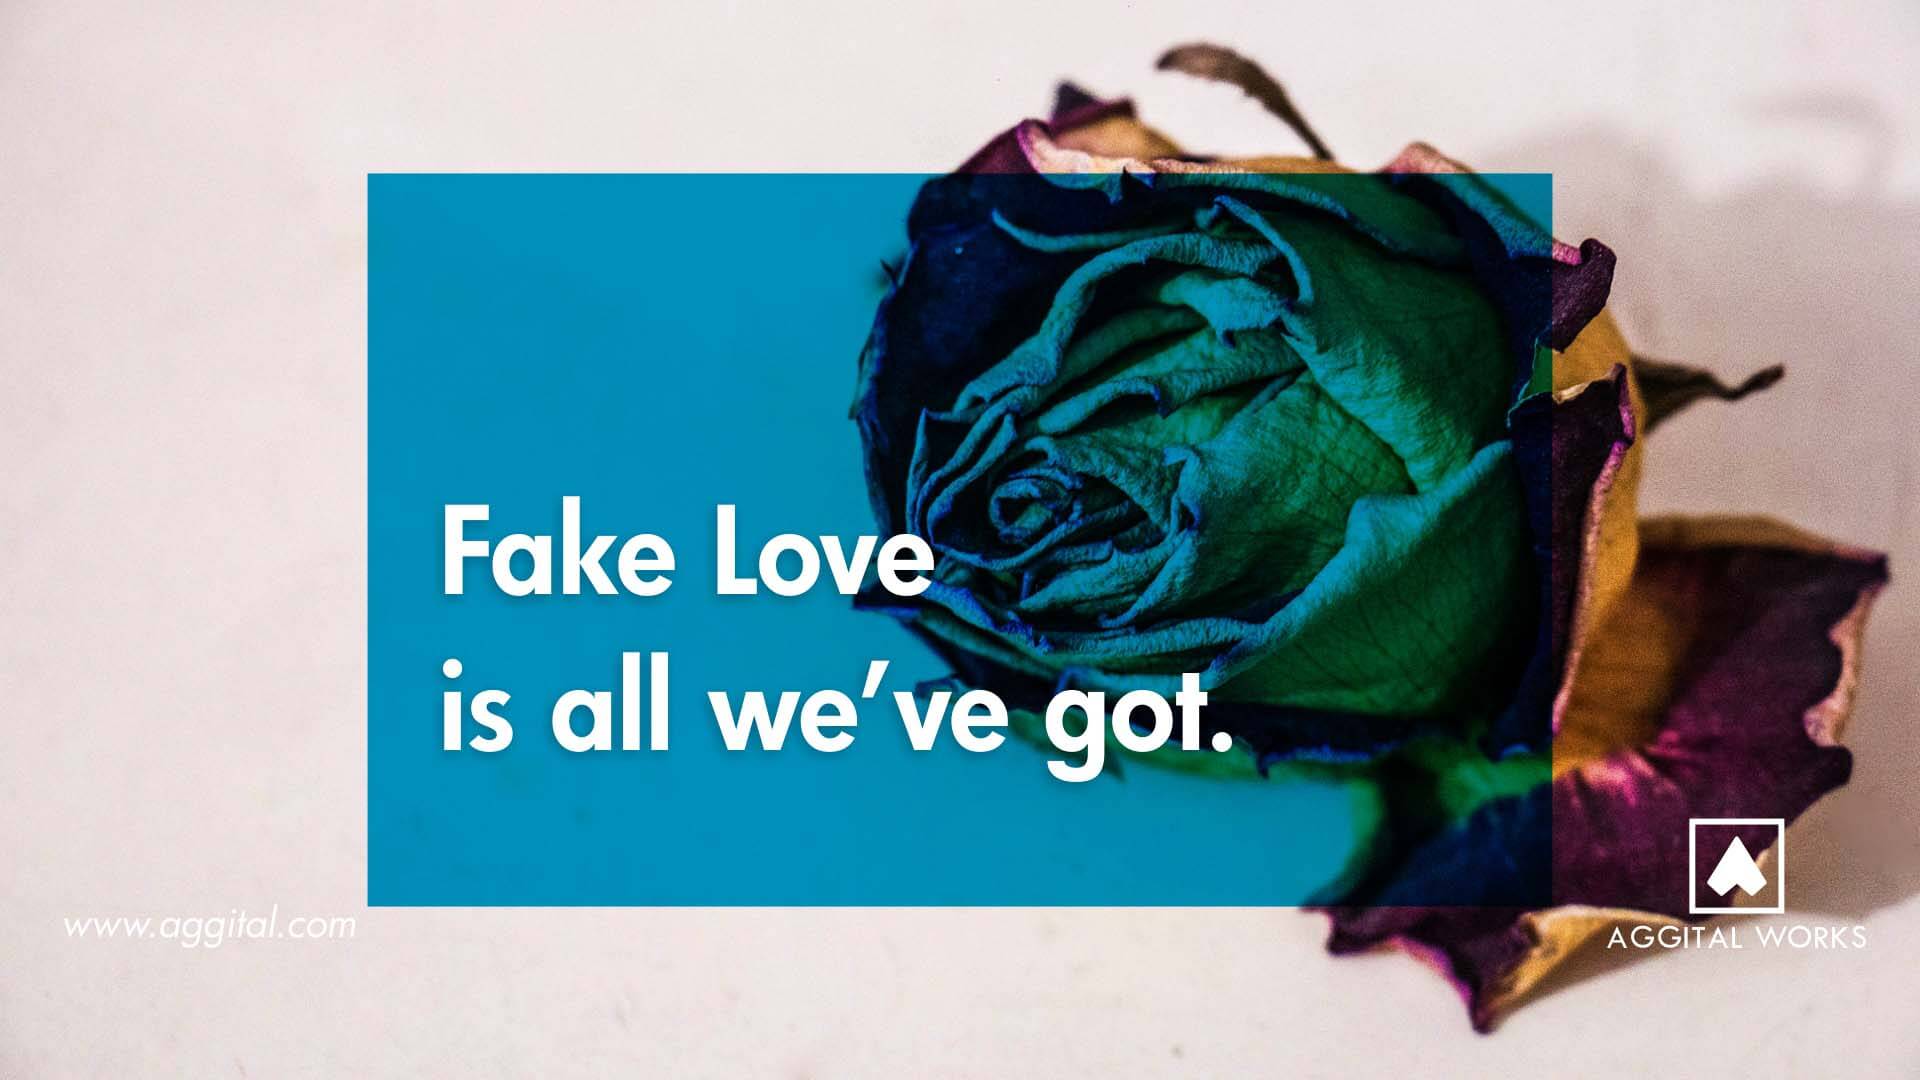 Fake Love Is What We Now Have